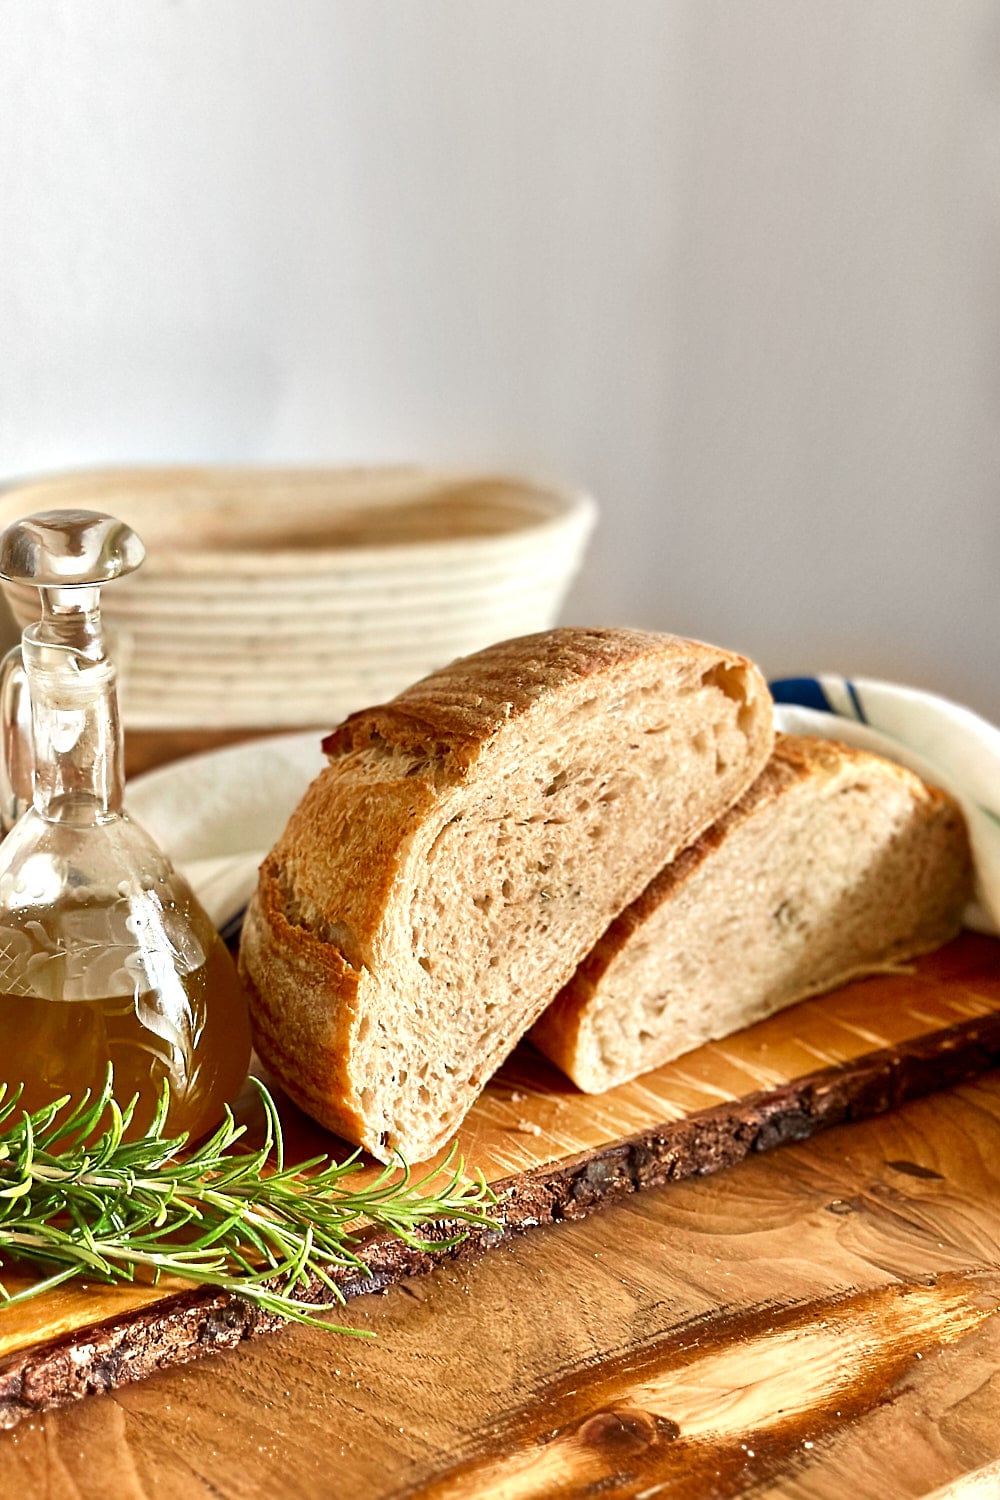 A loaf of rosemary sourdough bread with a small jug of olive oil and fresh twigs of rosemary next to it.